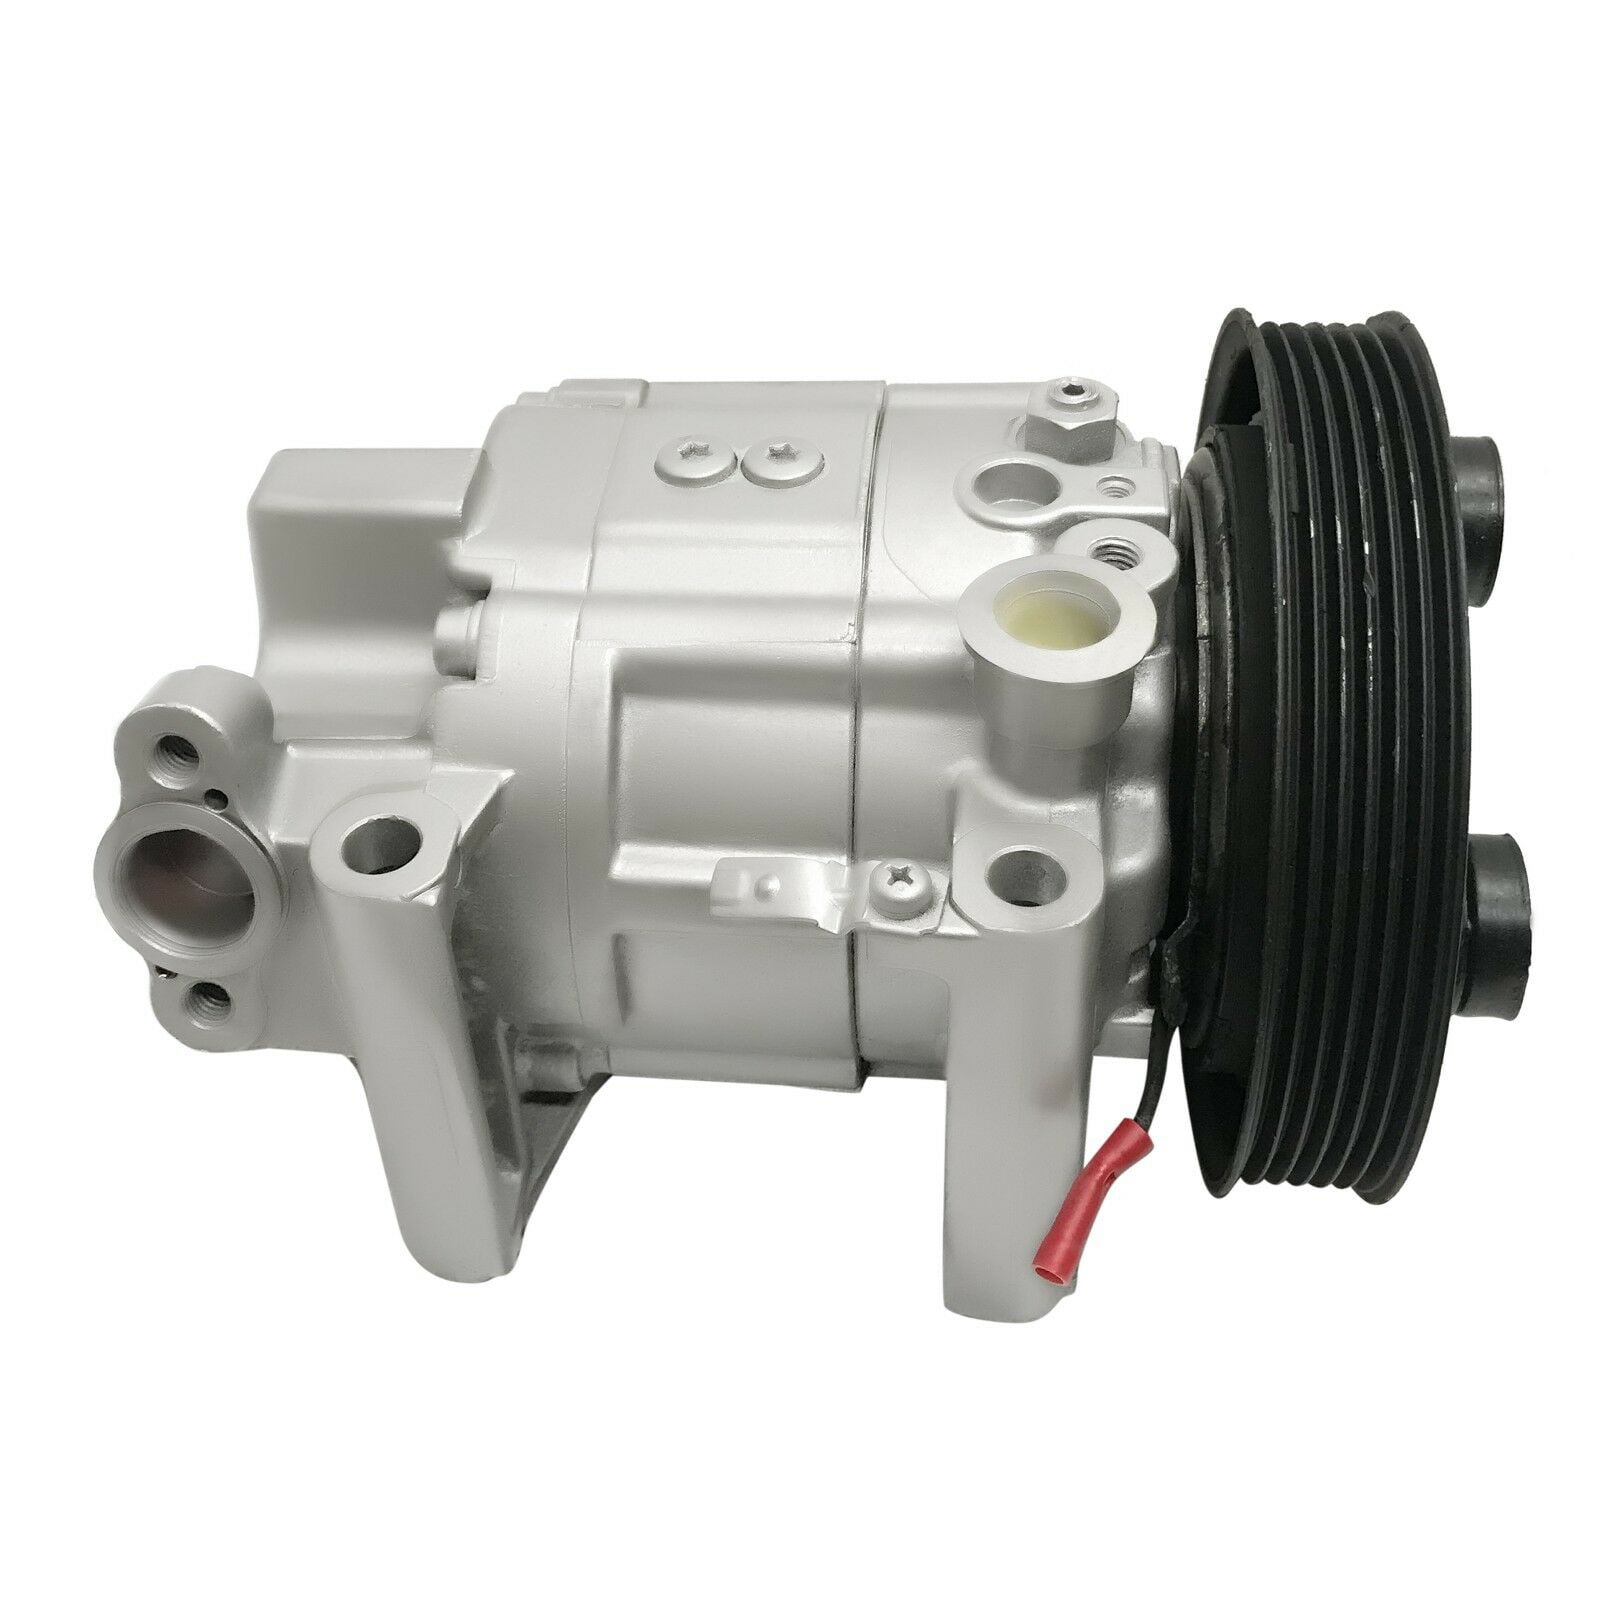 2002 Infiniti Q45 USA Remanufactured A/C Compressor Kit with 1 year  Warranty.